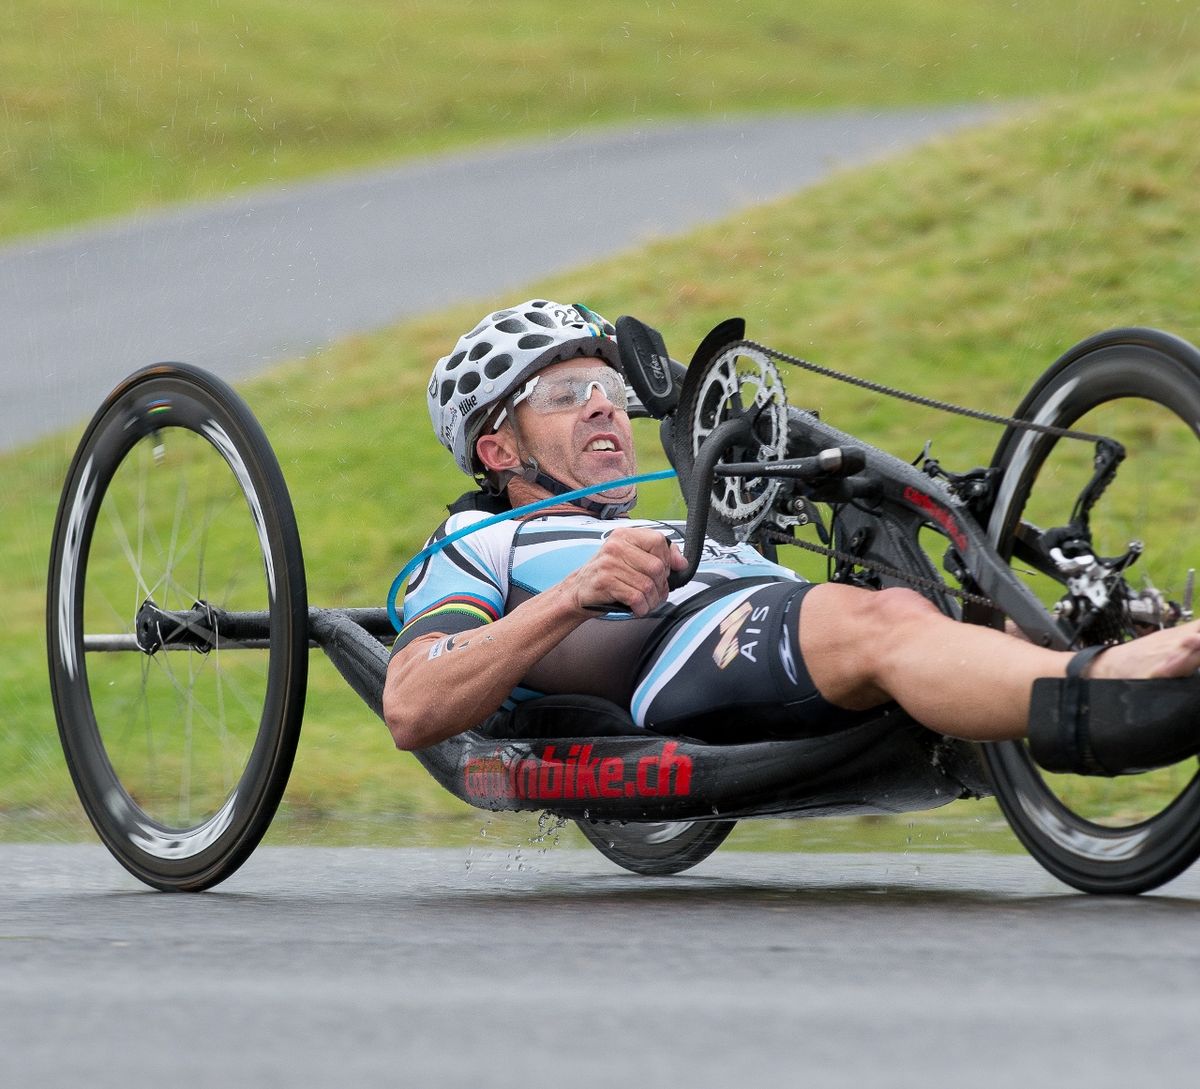 Fifteen Australians line up for historic ITU World Paratriathlon Event at Twin Waters